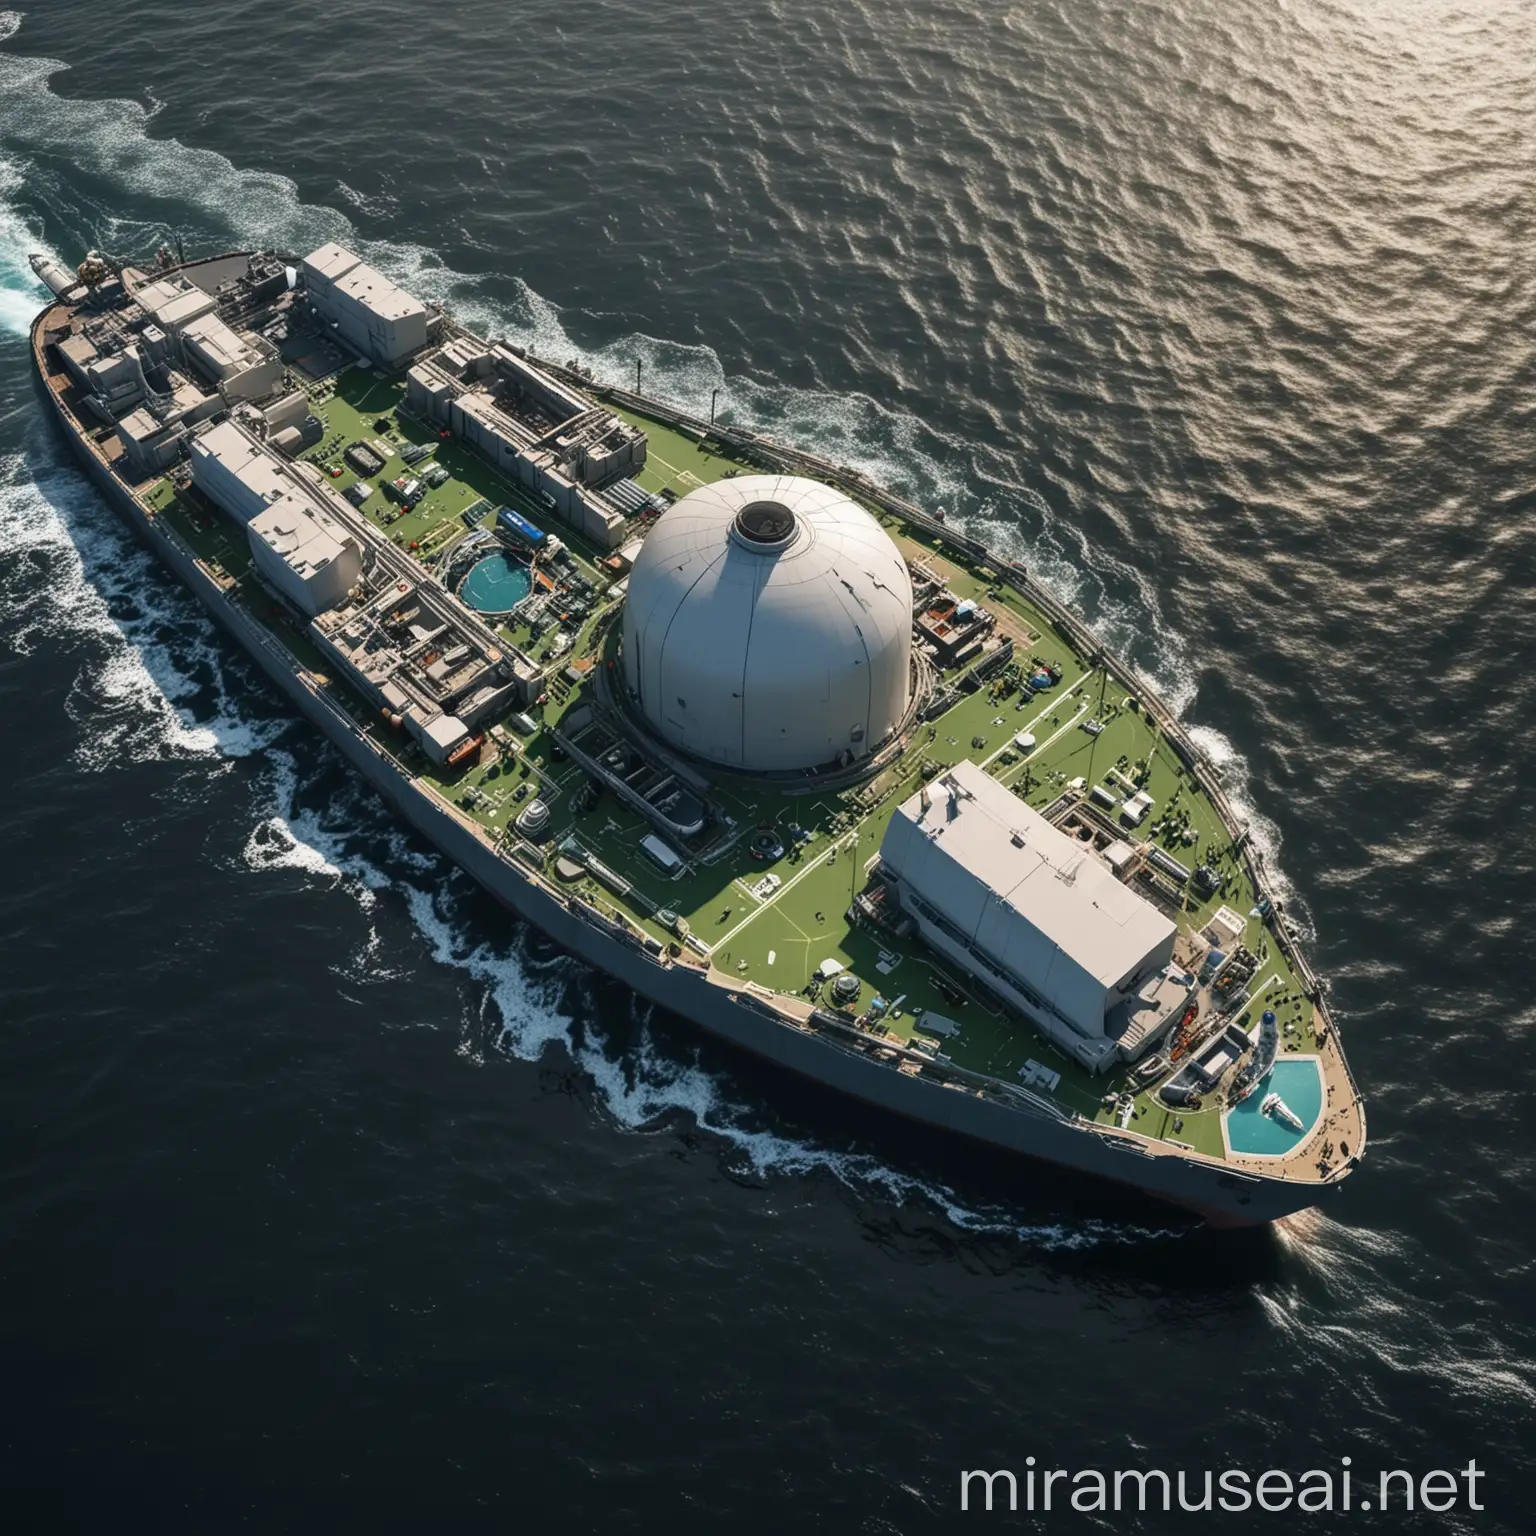 StateoftheArt Floating Nuclear Power Plant on Advanced Ship